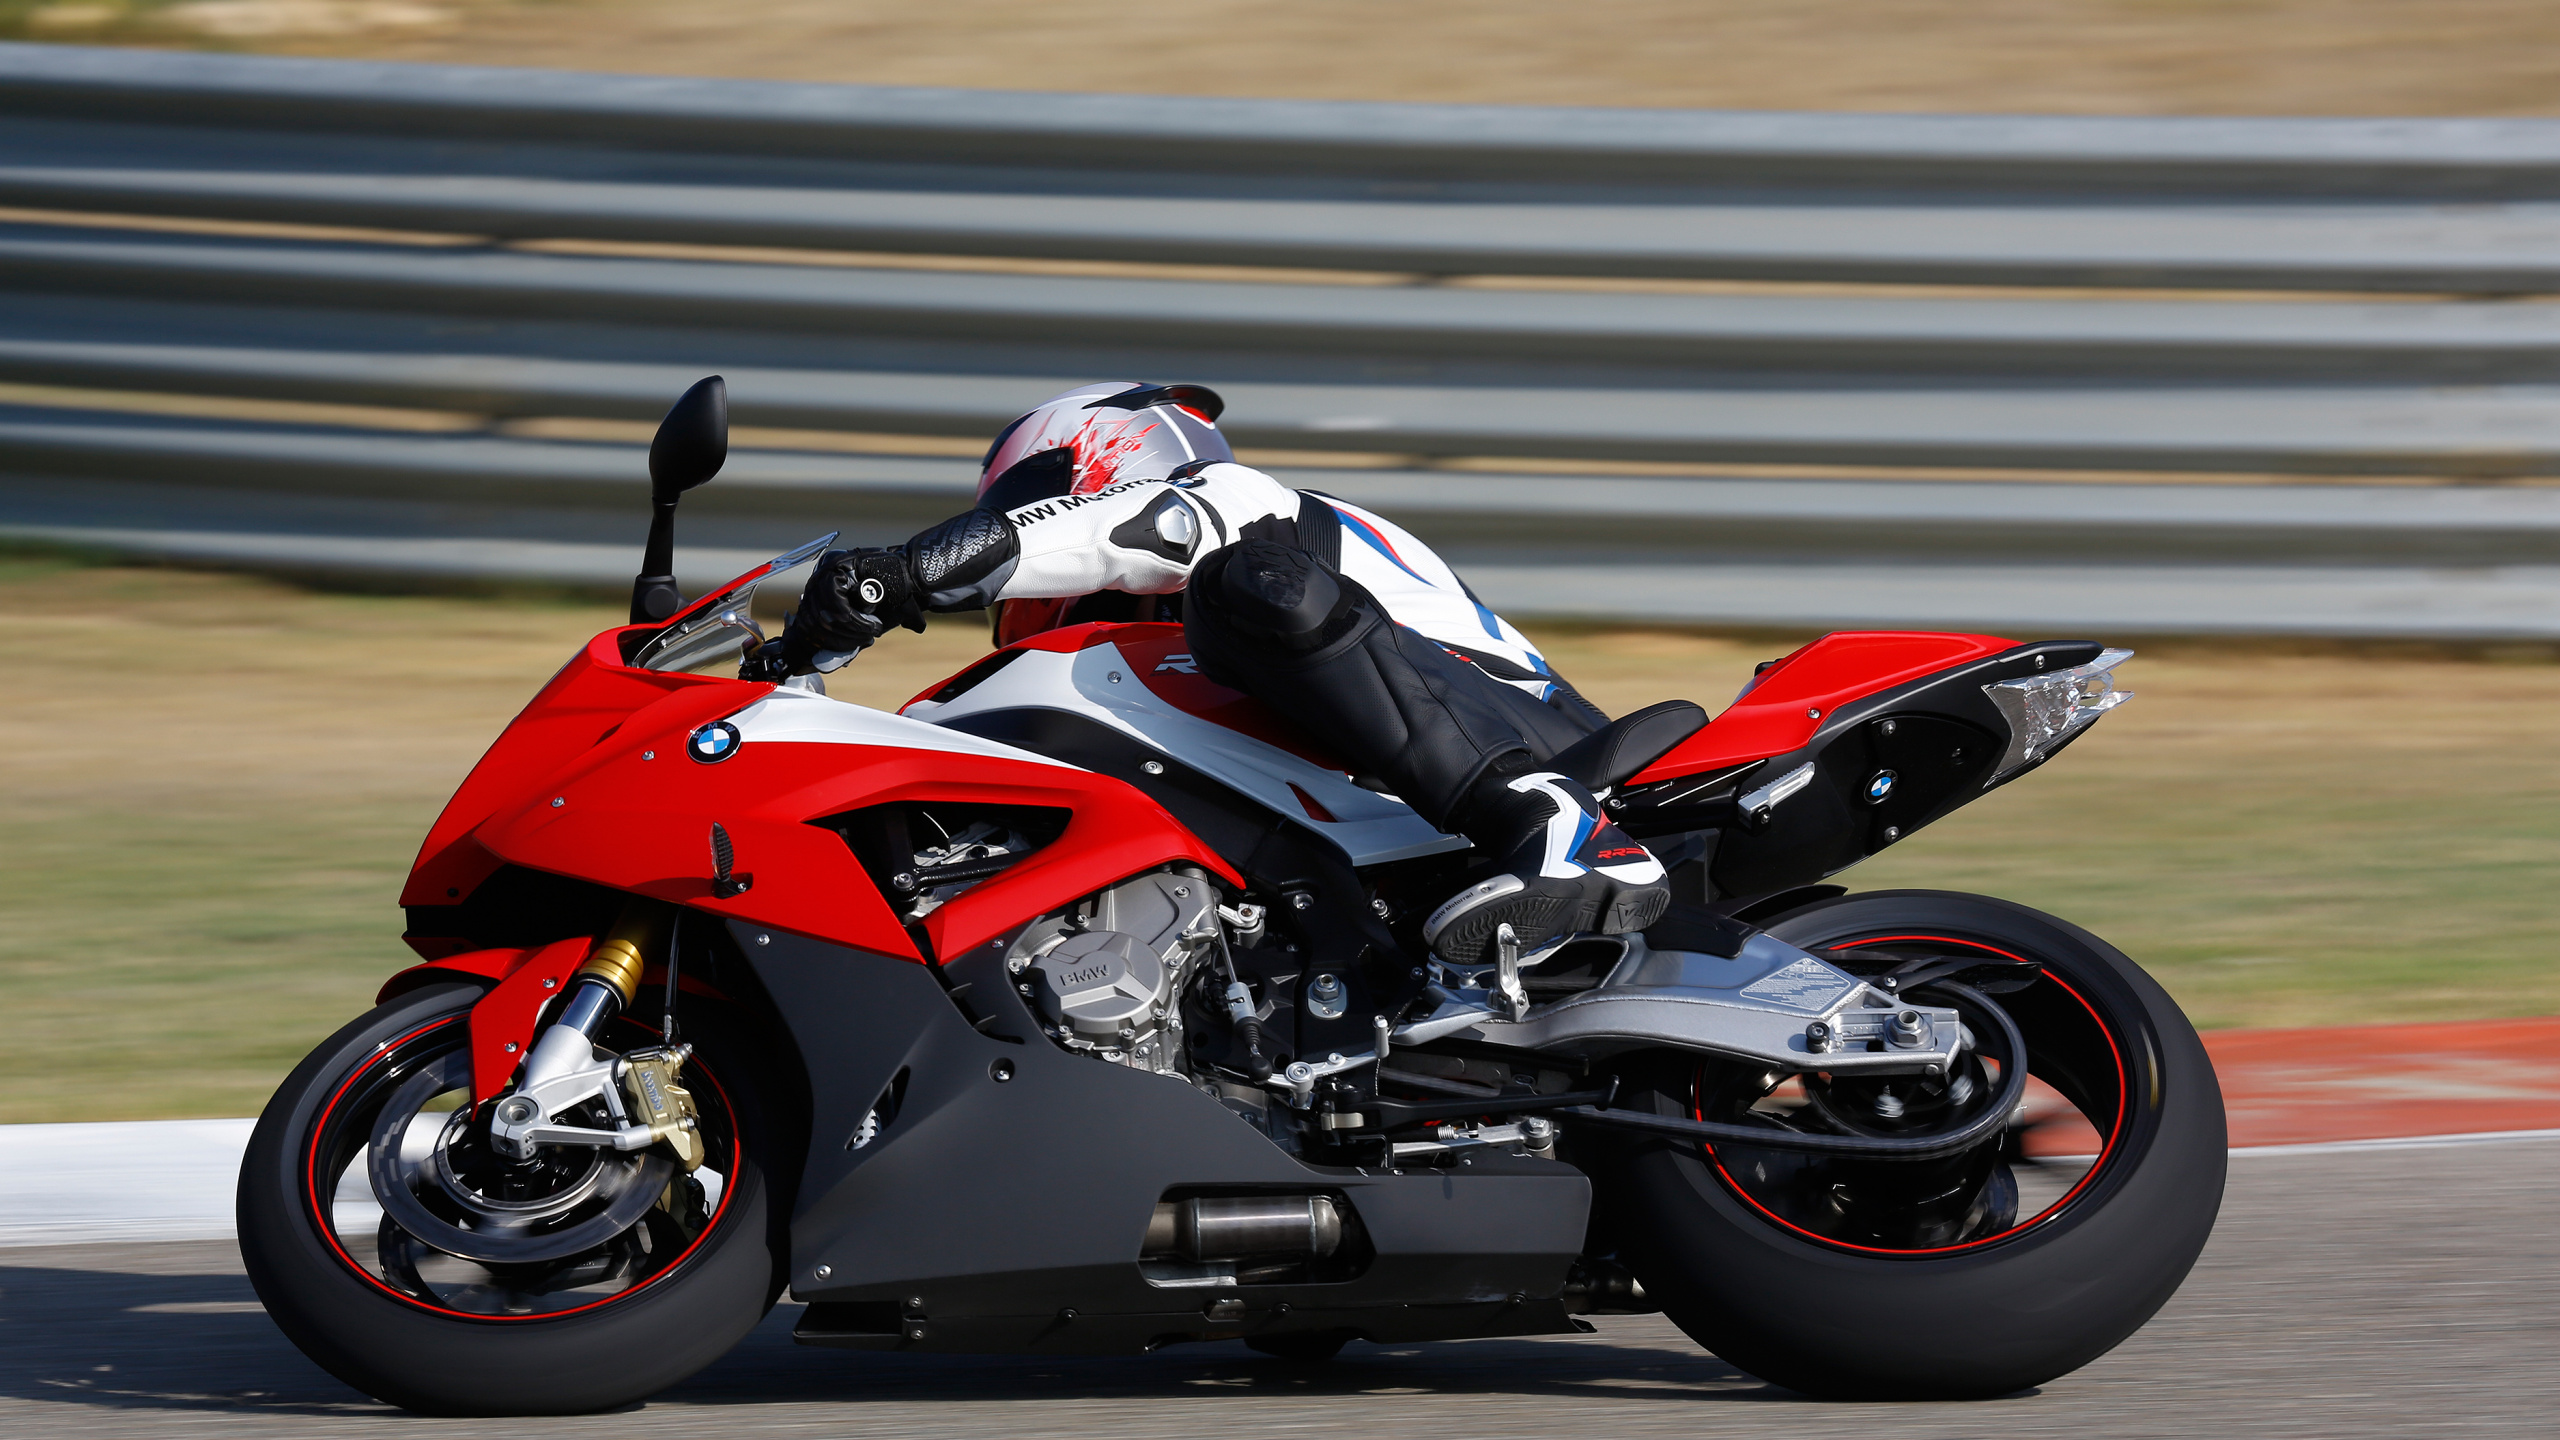 Man in Black and Red Sports Bike Helmet Riding on Red and Black Sports Bike. Wallpaper in 2560x1440 Resolution